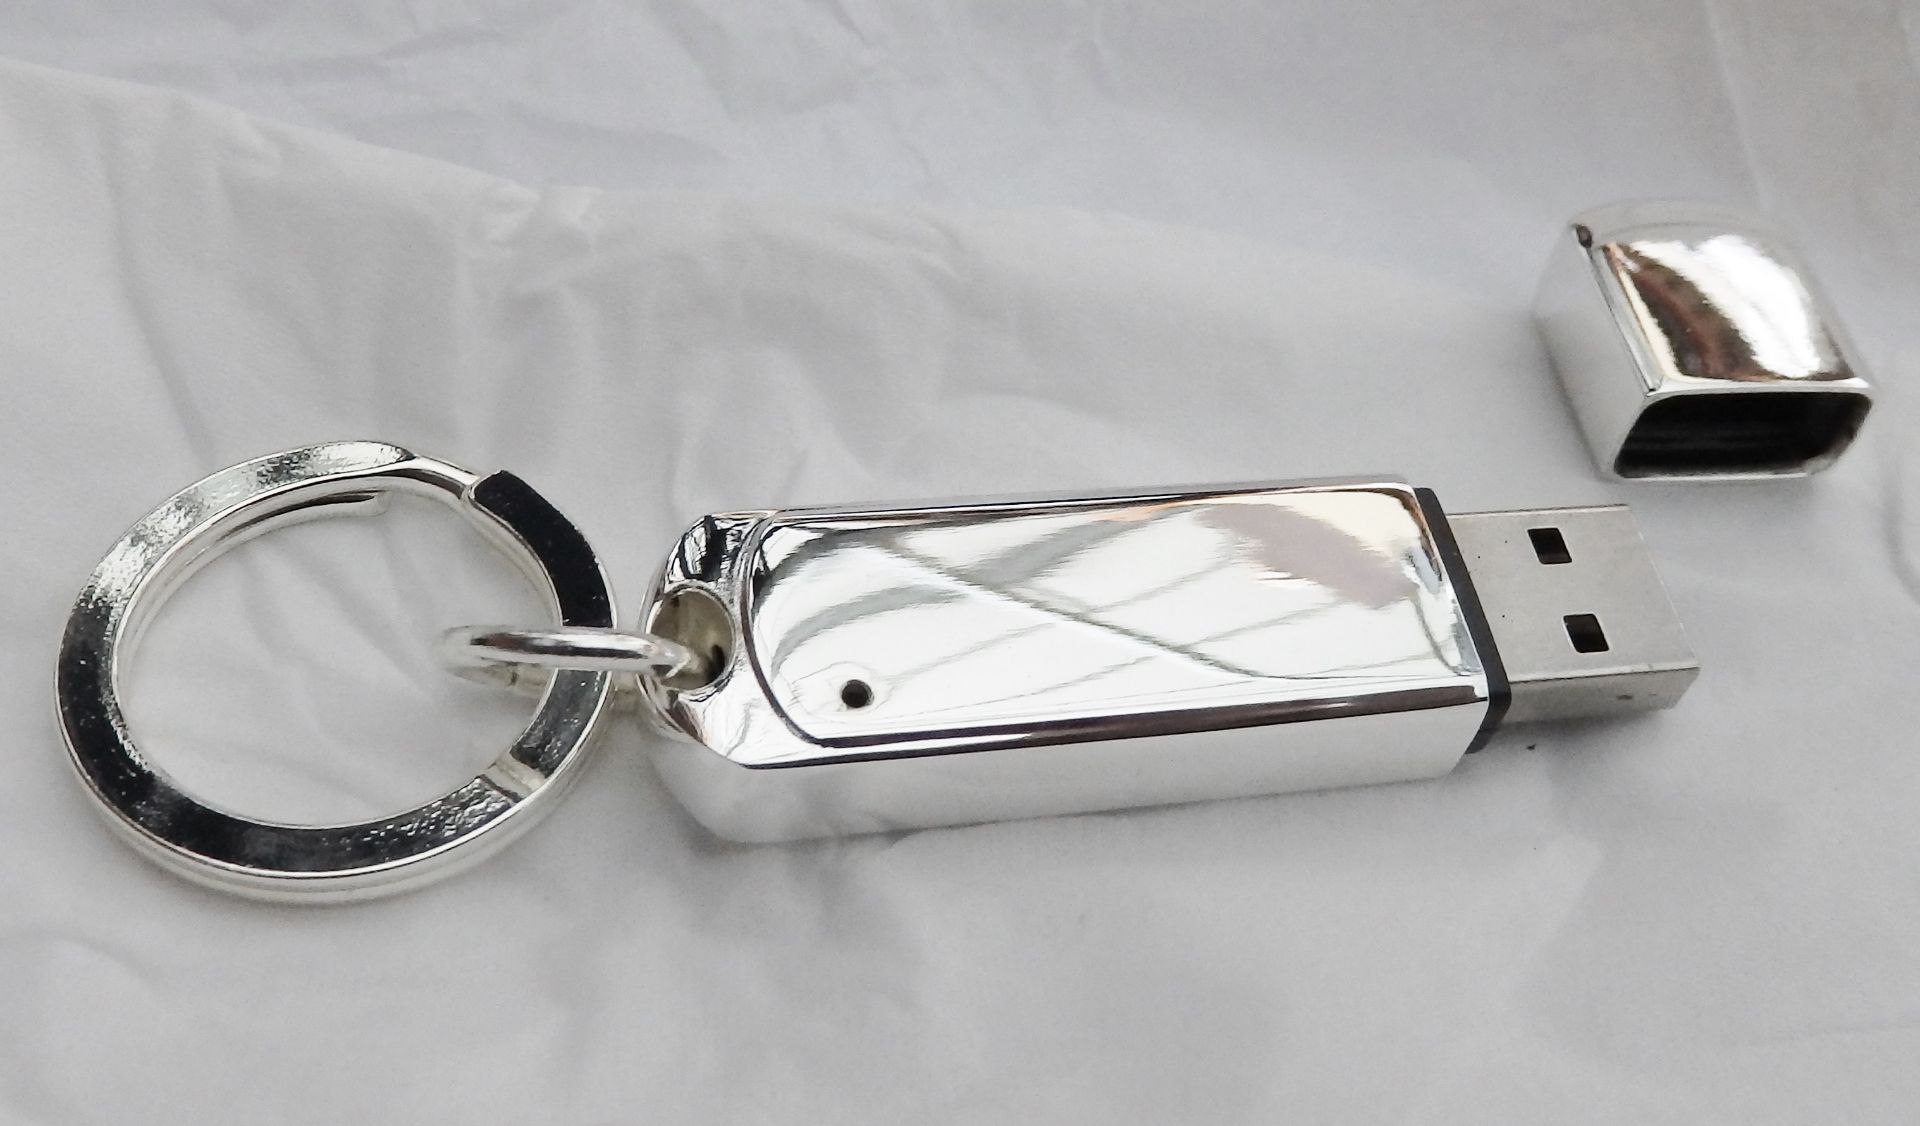 10 x ICE London Silver Plated 8GB USB Flashdrive Keyrings - Brand New & Sealed Stock - Ref: - Image 3 of 4